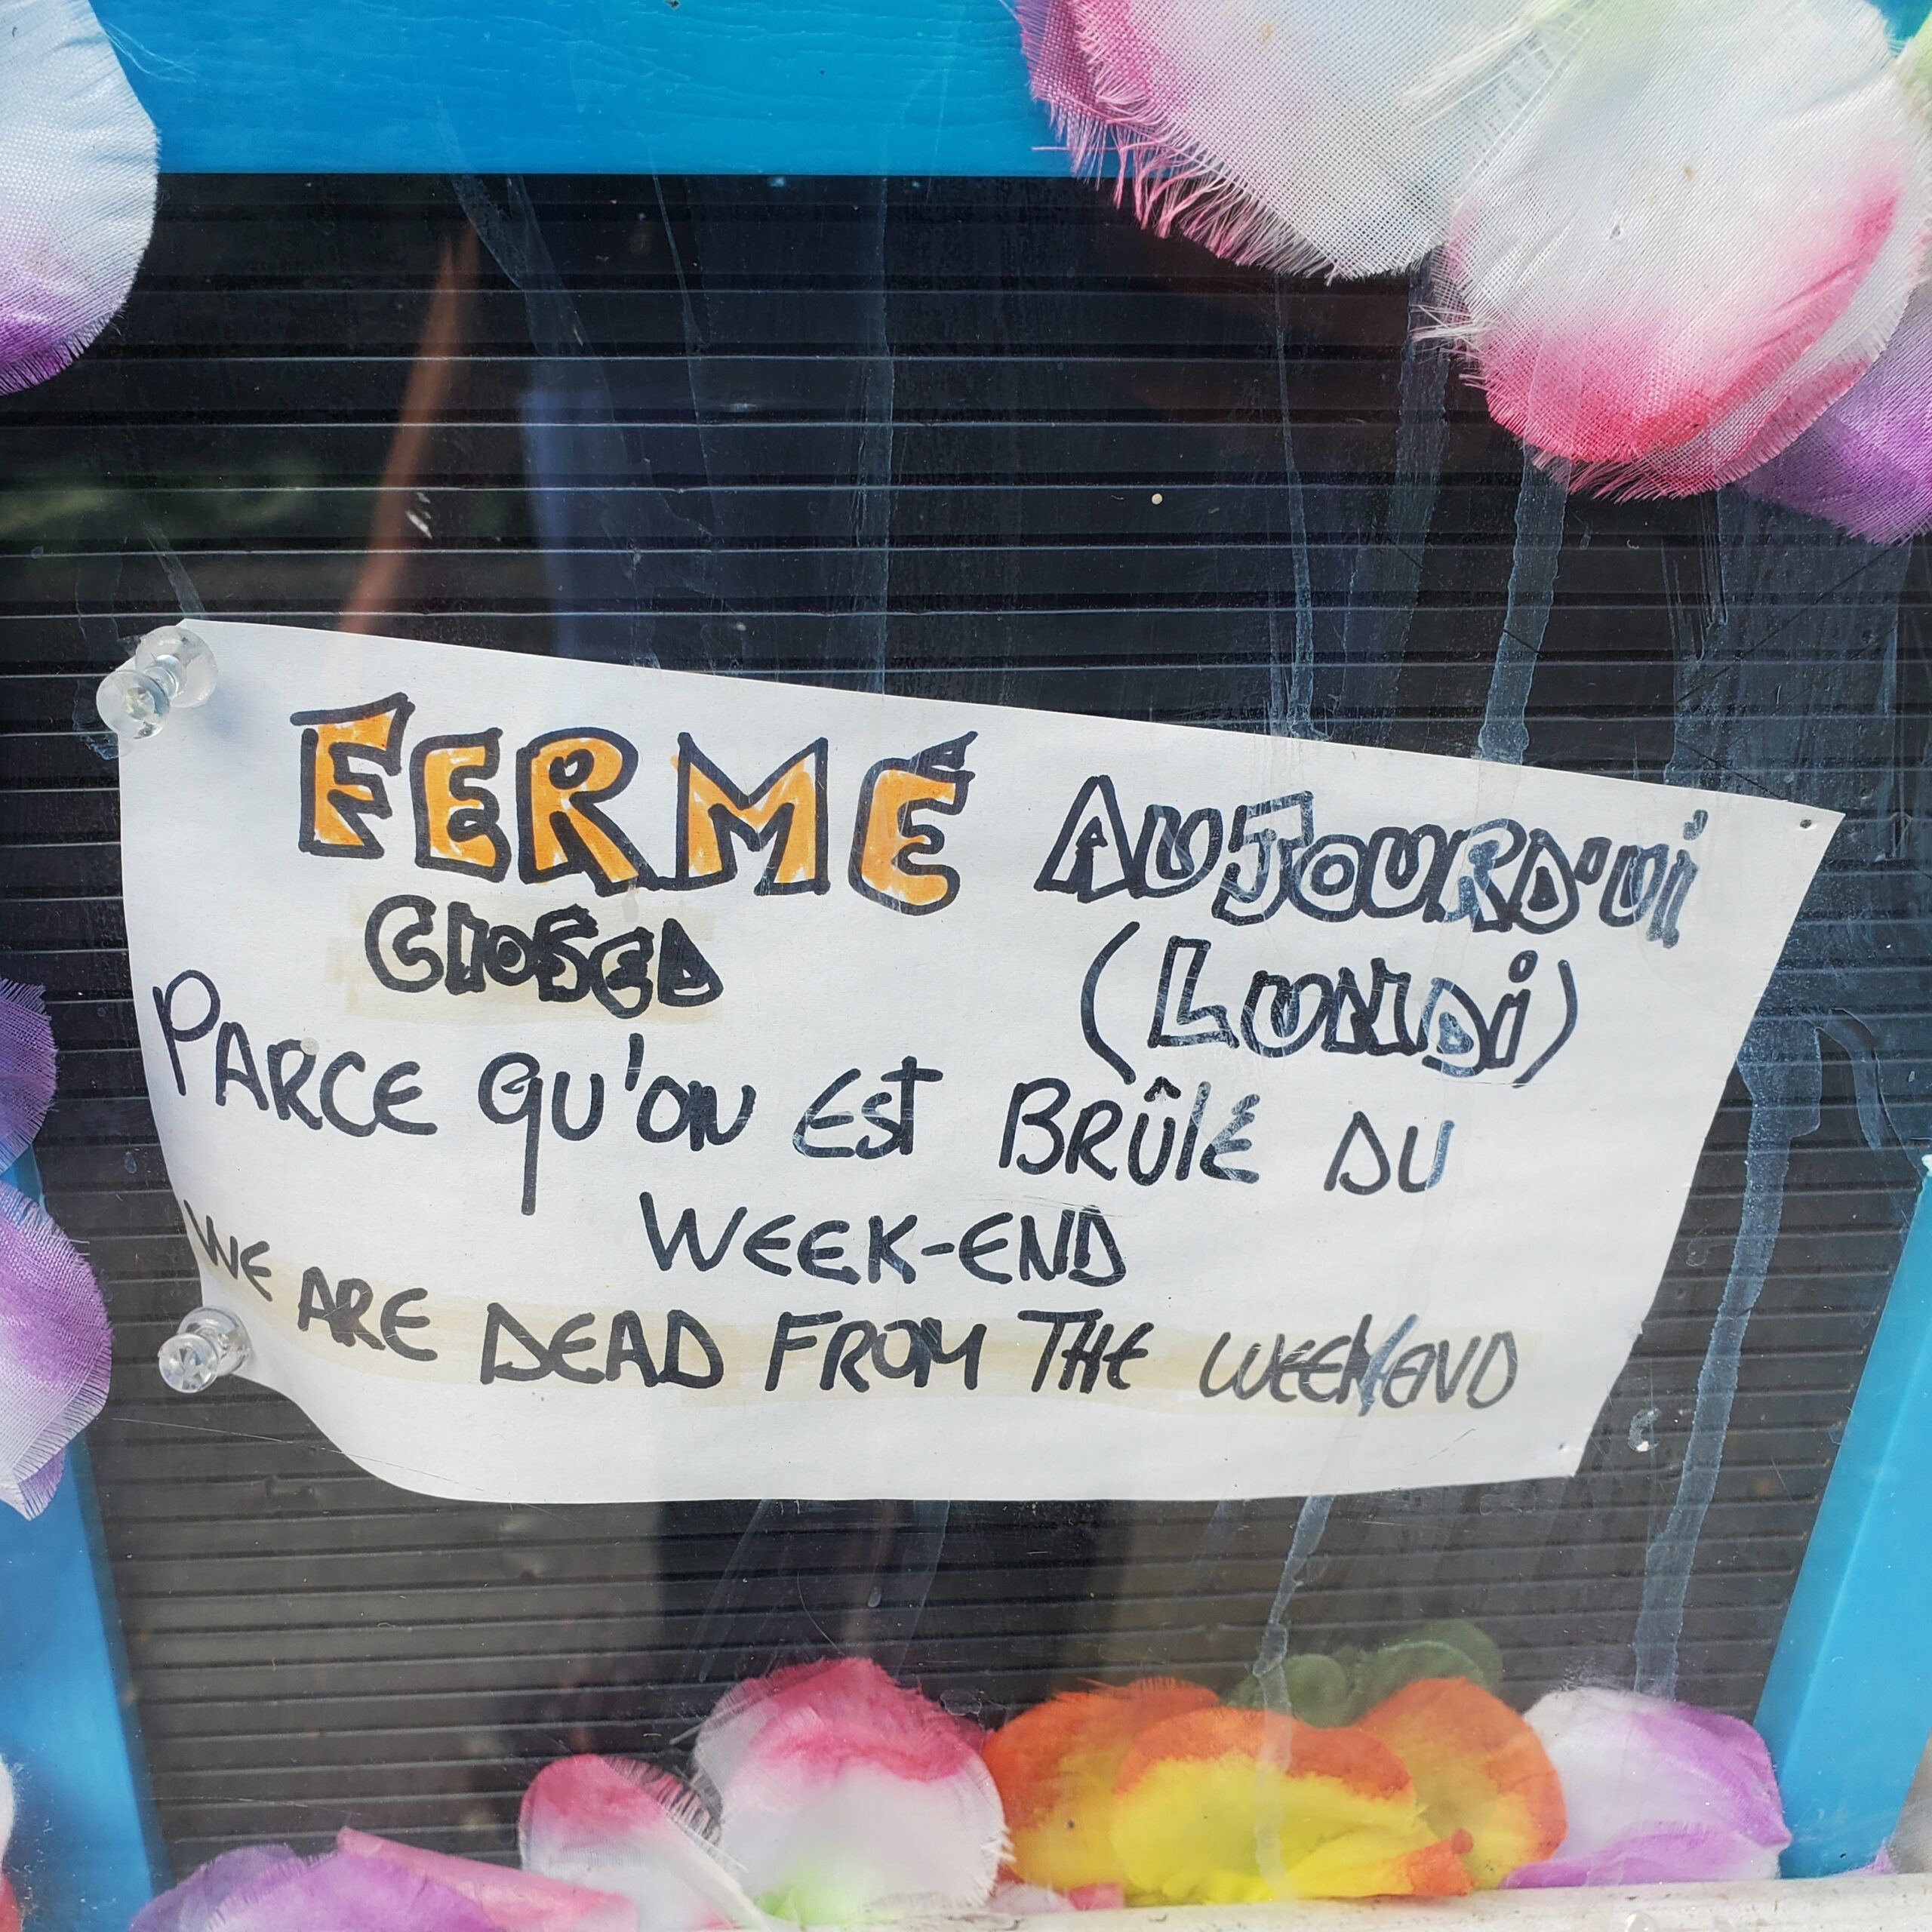 Sign in a window that says Closed today (Monday) because we are dead from the weekend, in English and French